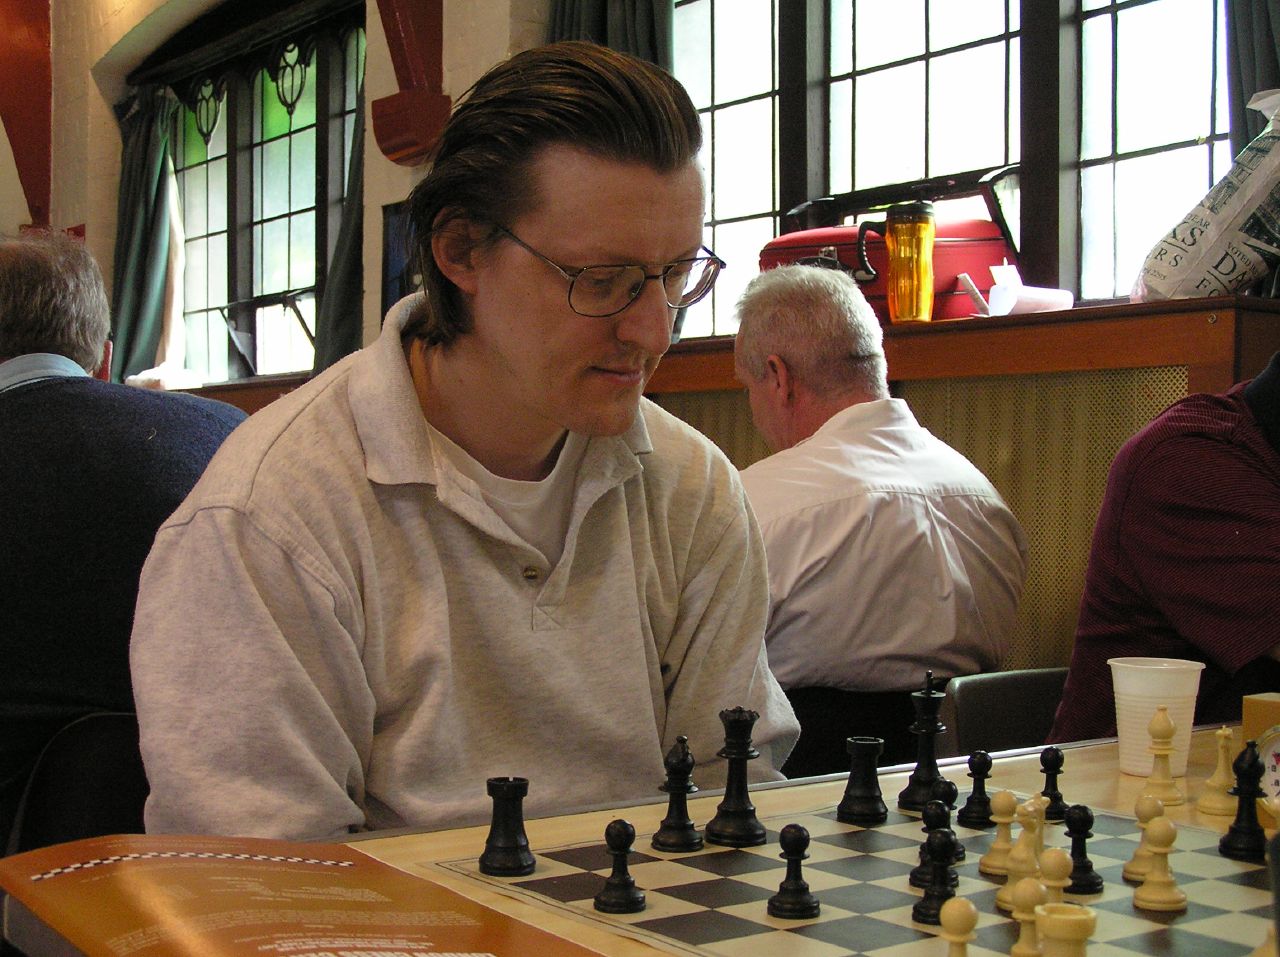 a person playing chess while other play chess